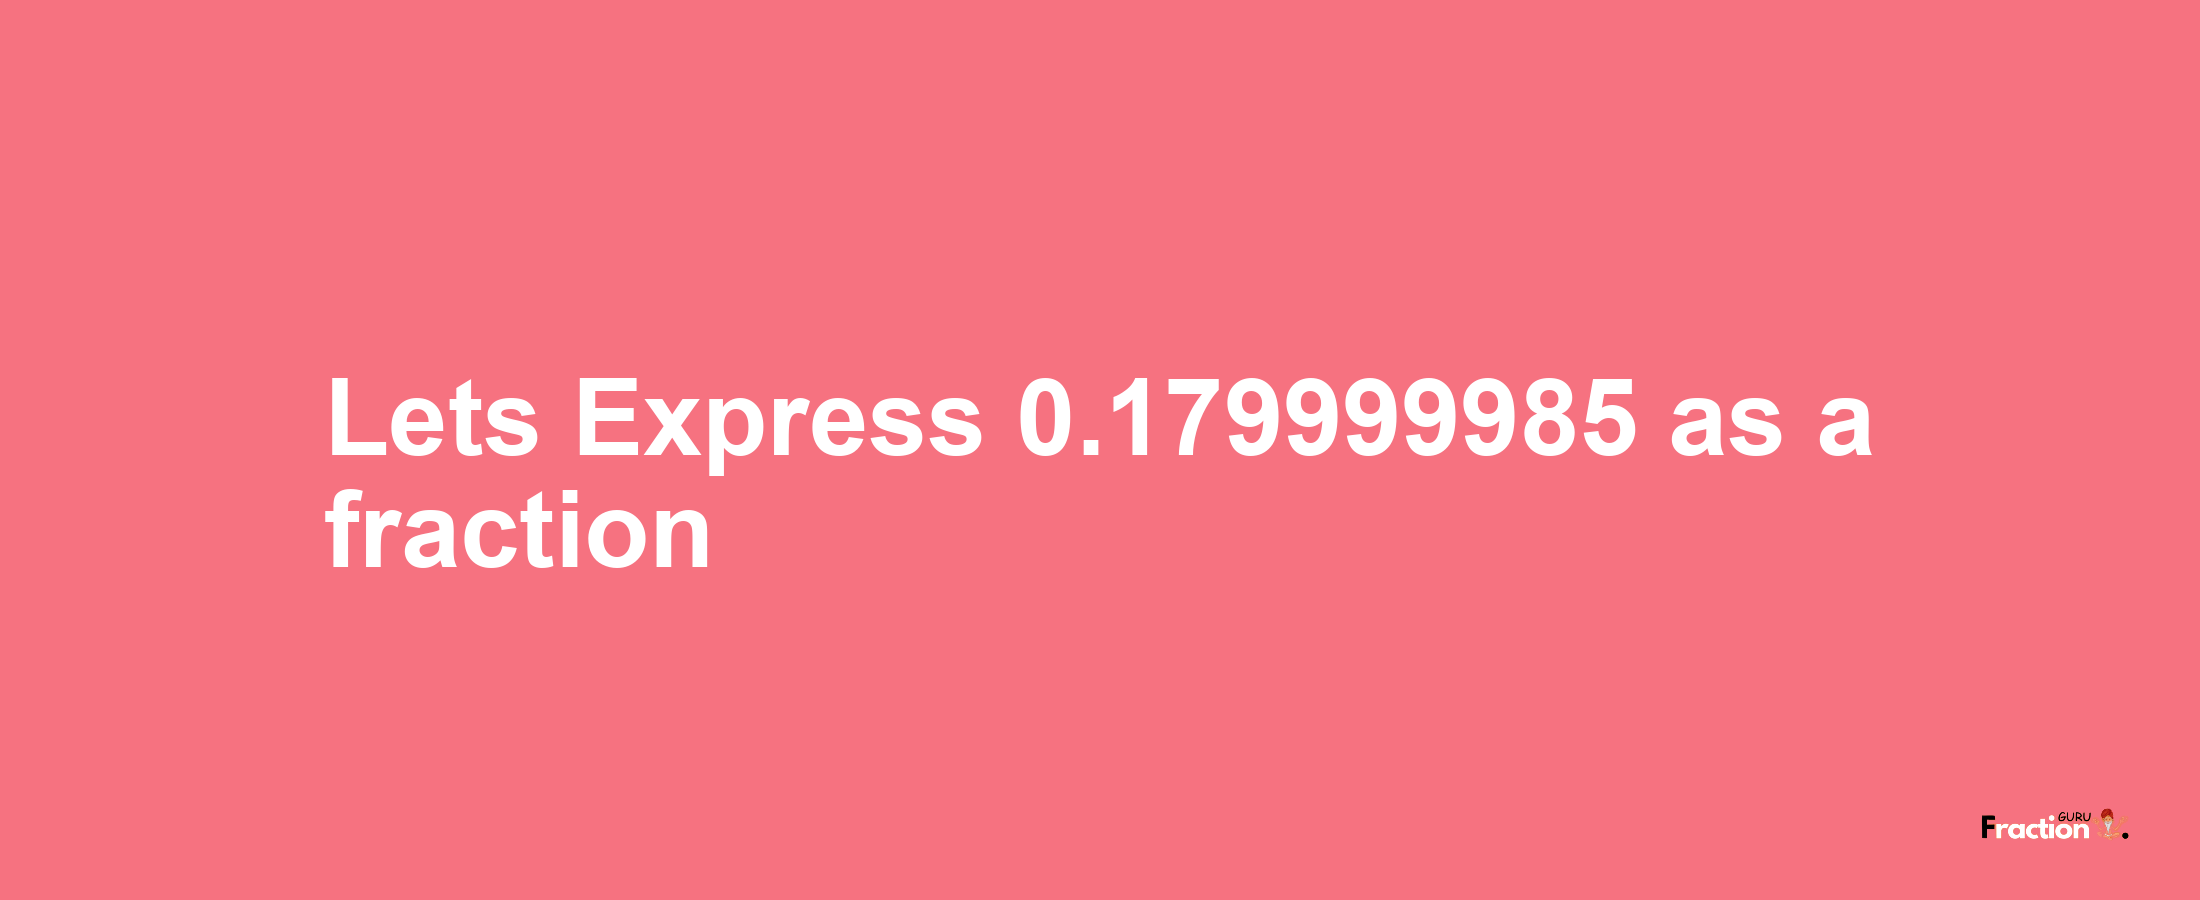 Lets Express 0.179999985 as afraction